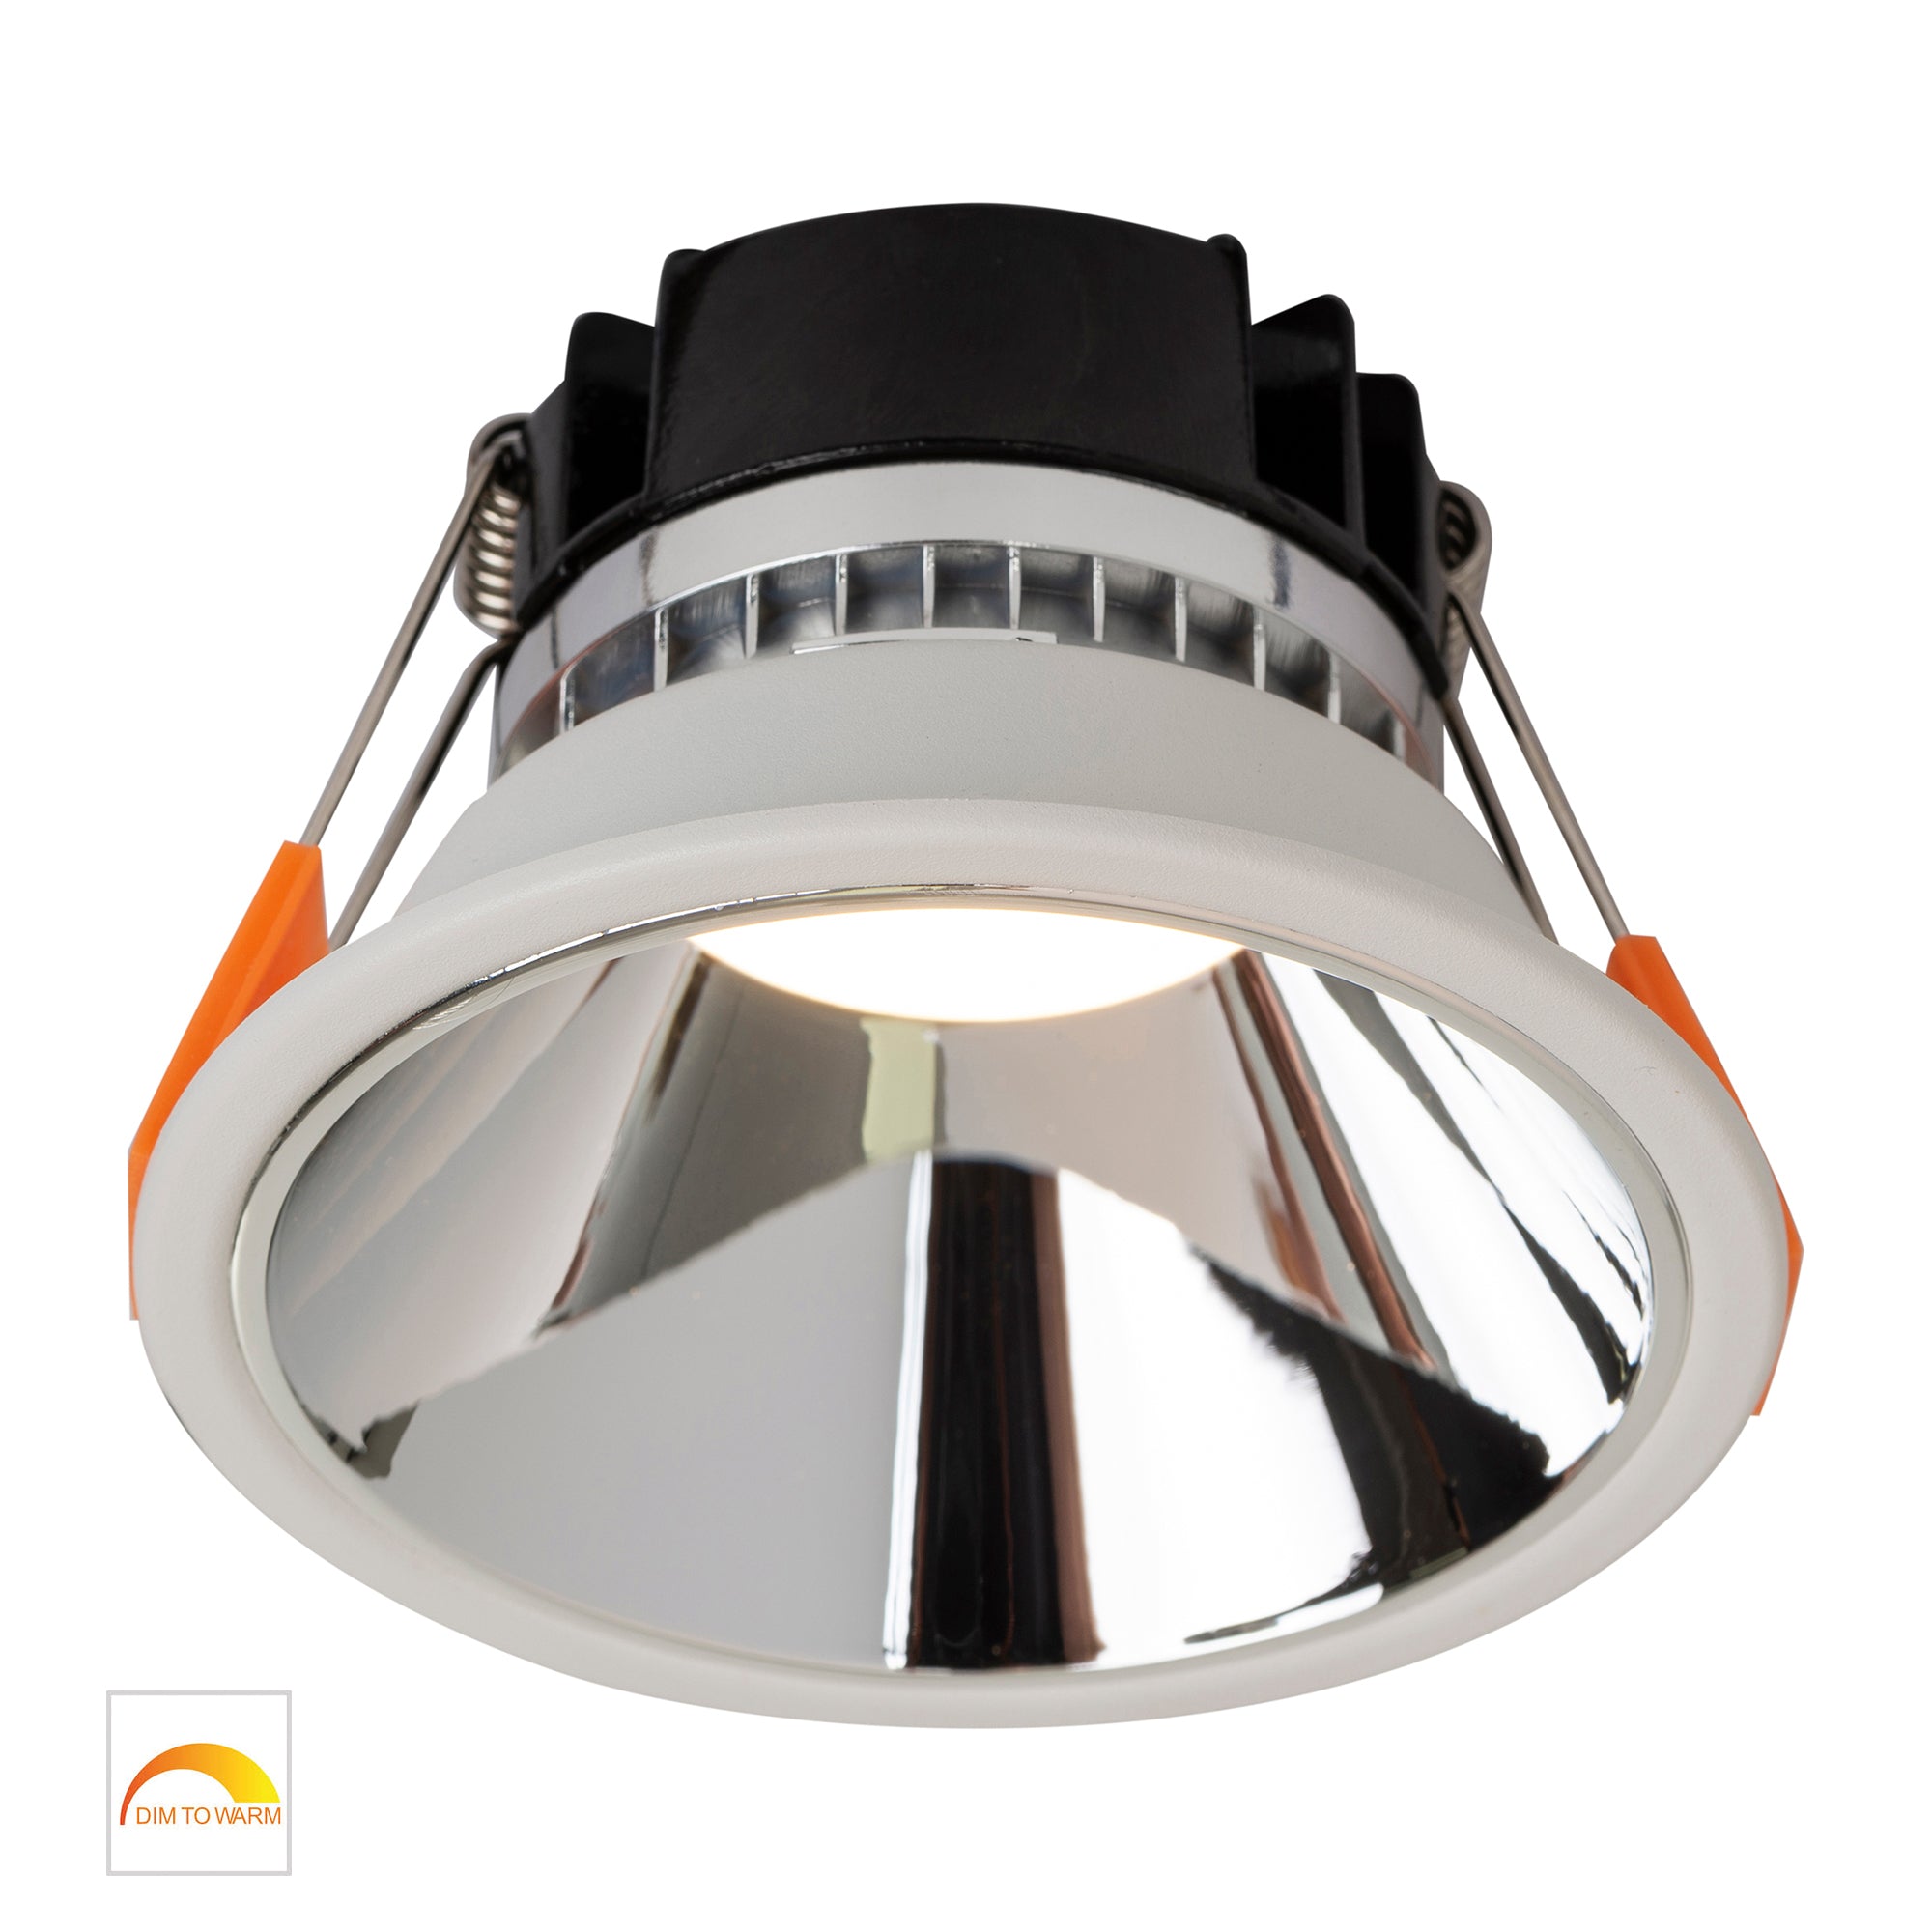 HV5528D2W-WC - Gleam White with Chrome Insert Fixed Dim to Warm LED Downlight